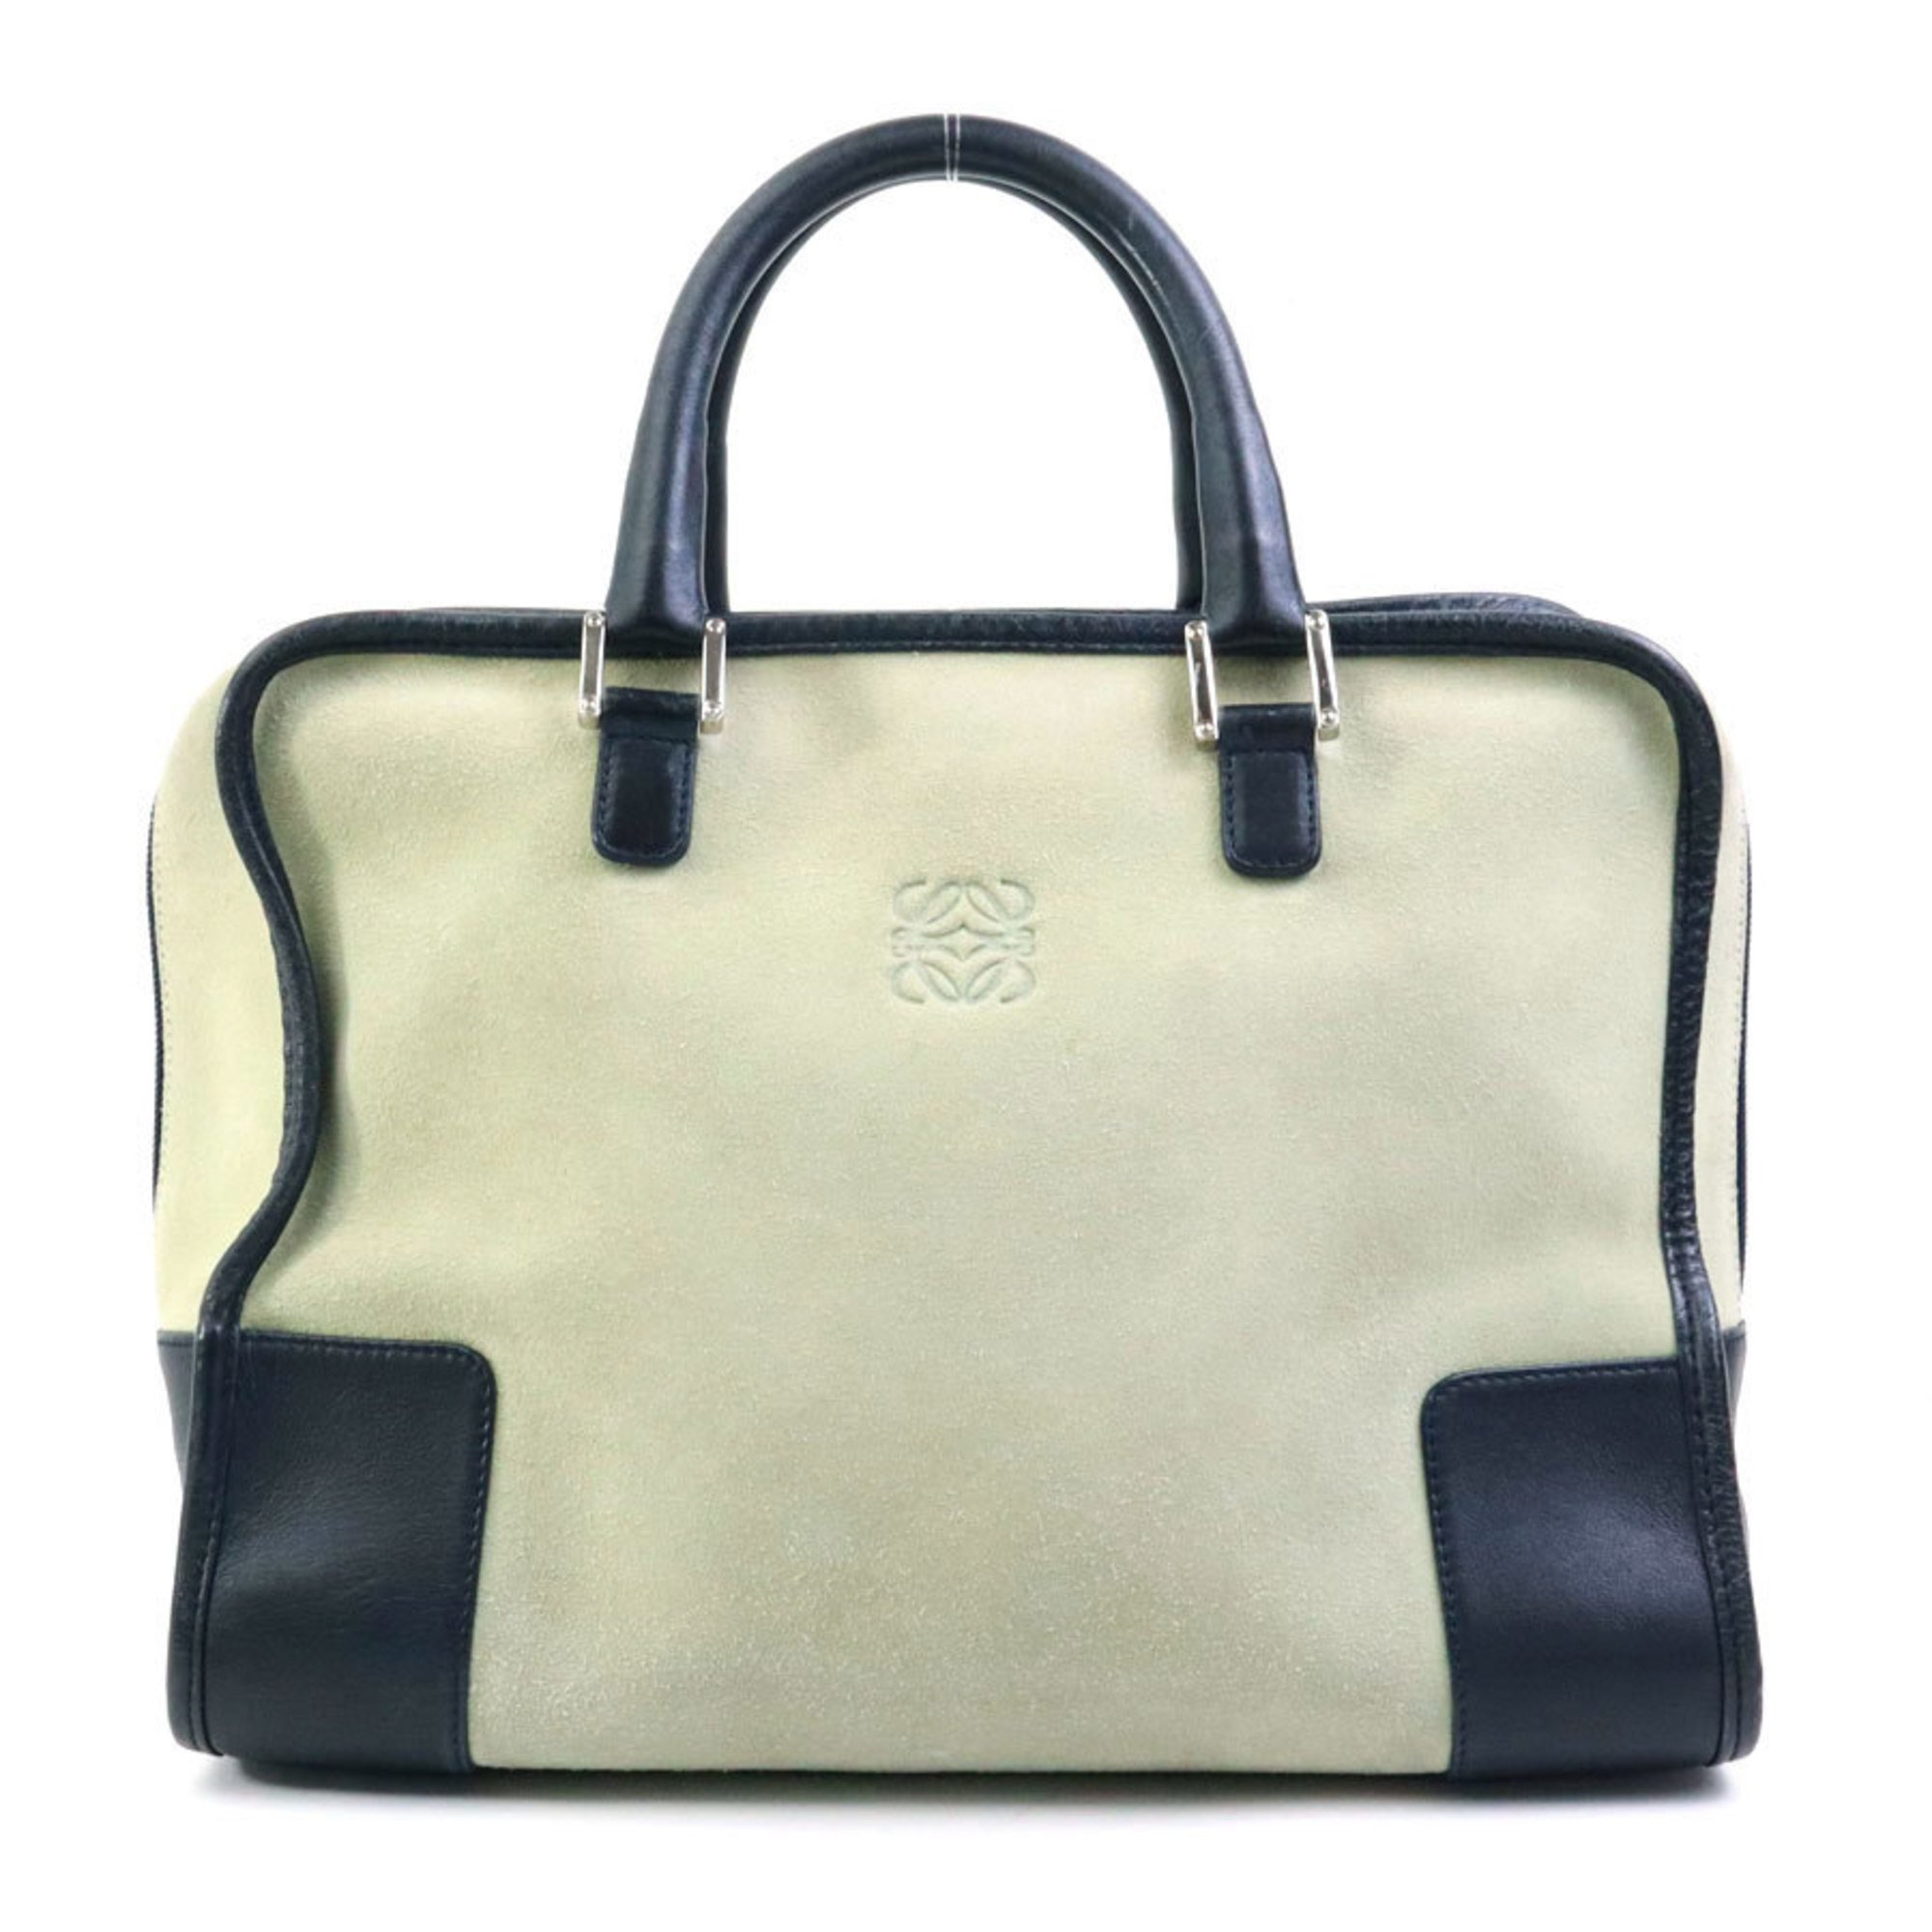 LOEWE Amazona handbag in suede and leather, light green, black silver, for women, e58742a